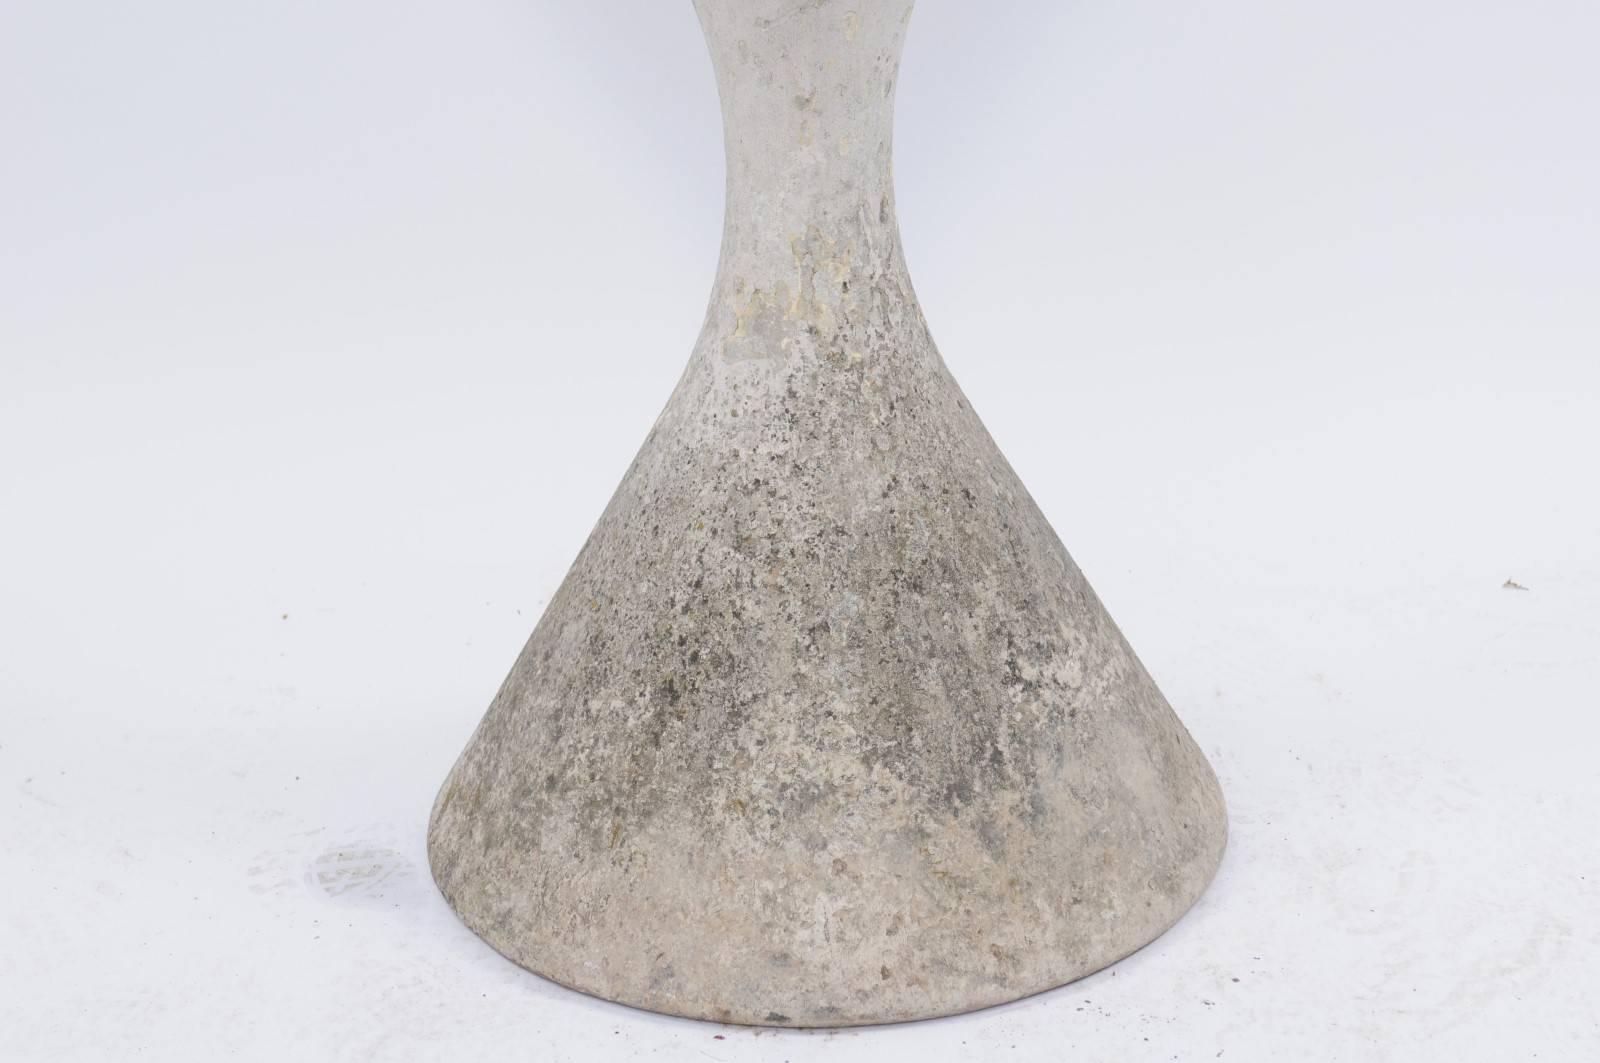 Swiss Willy Guhl for Eternit Diabolo Concrete Hourglass Planter from the 1960s 2